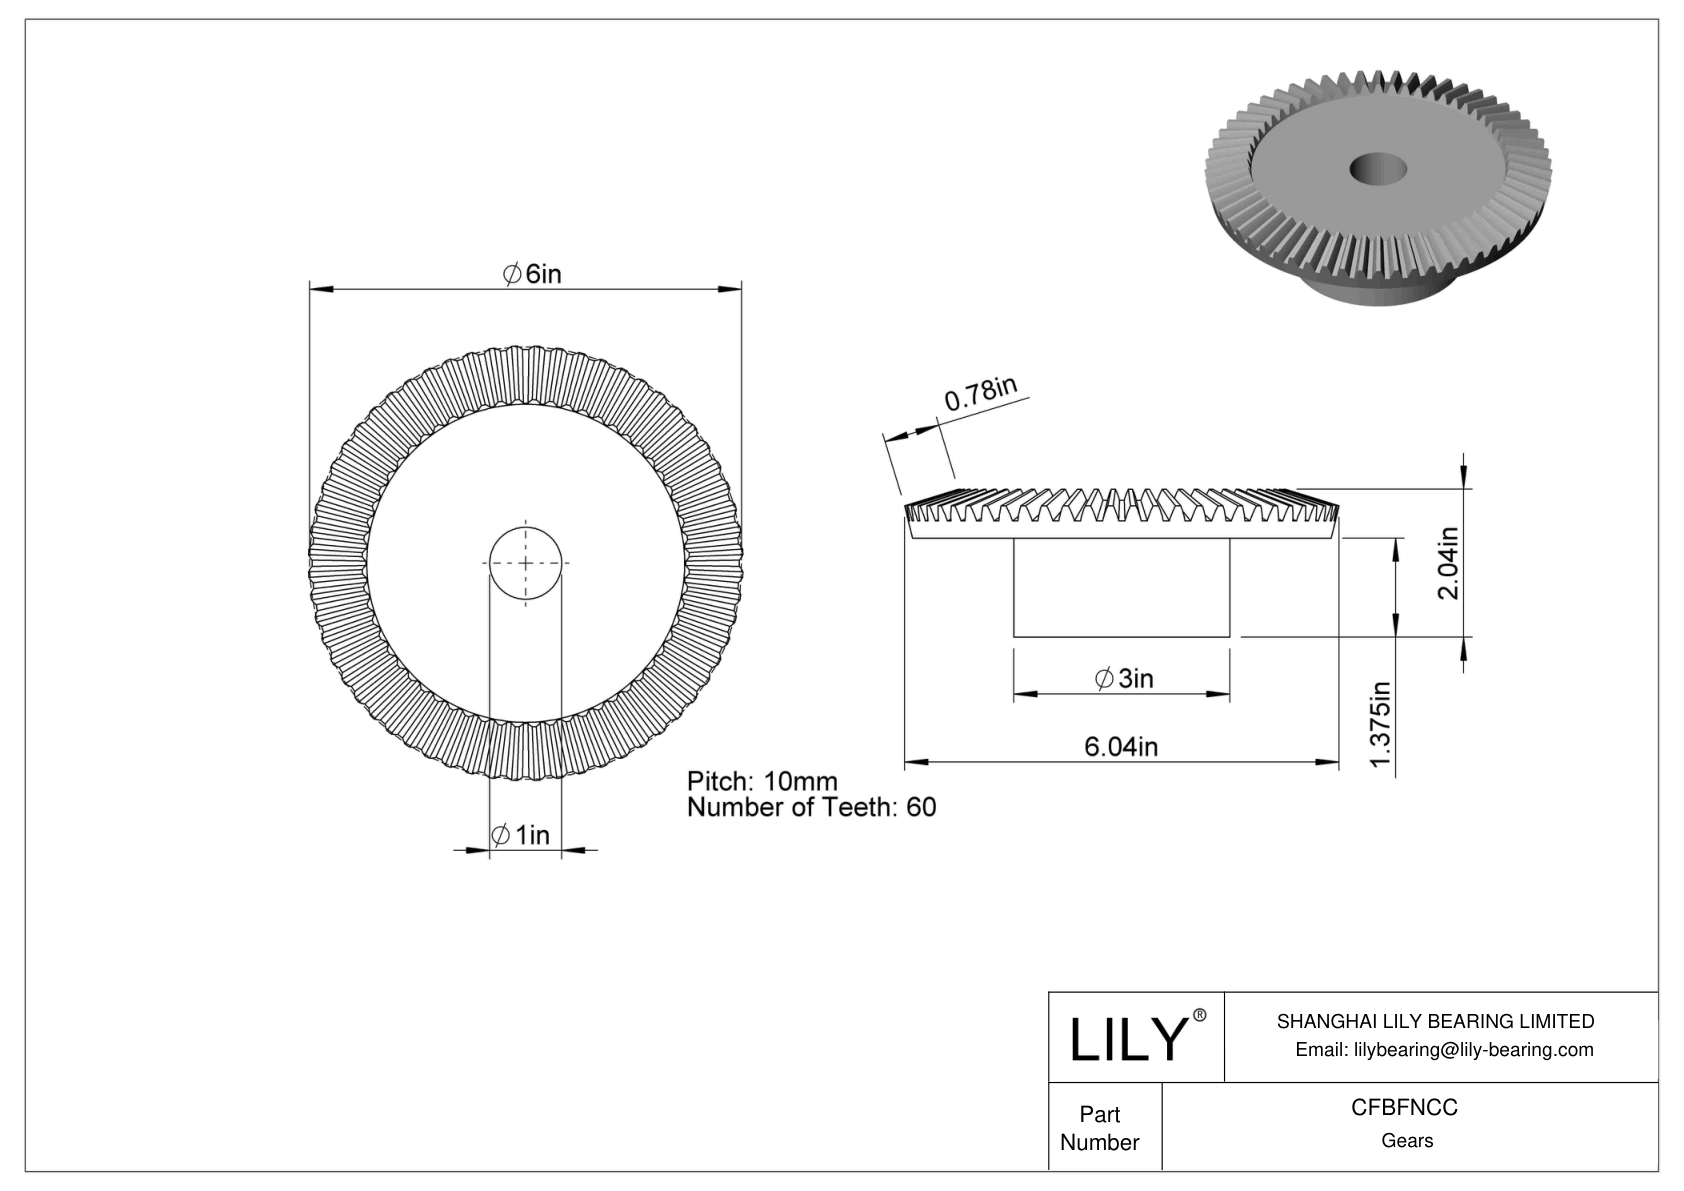 CFBFNCC Inch Gears cad drawing